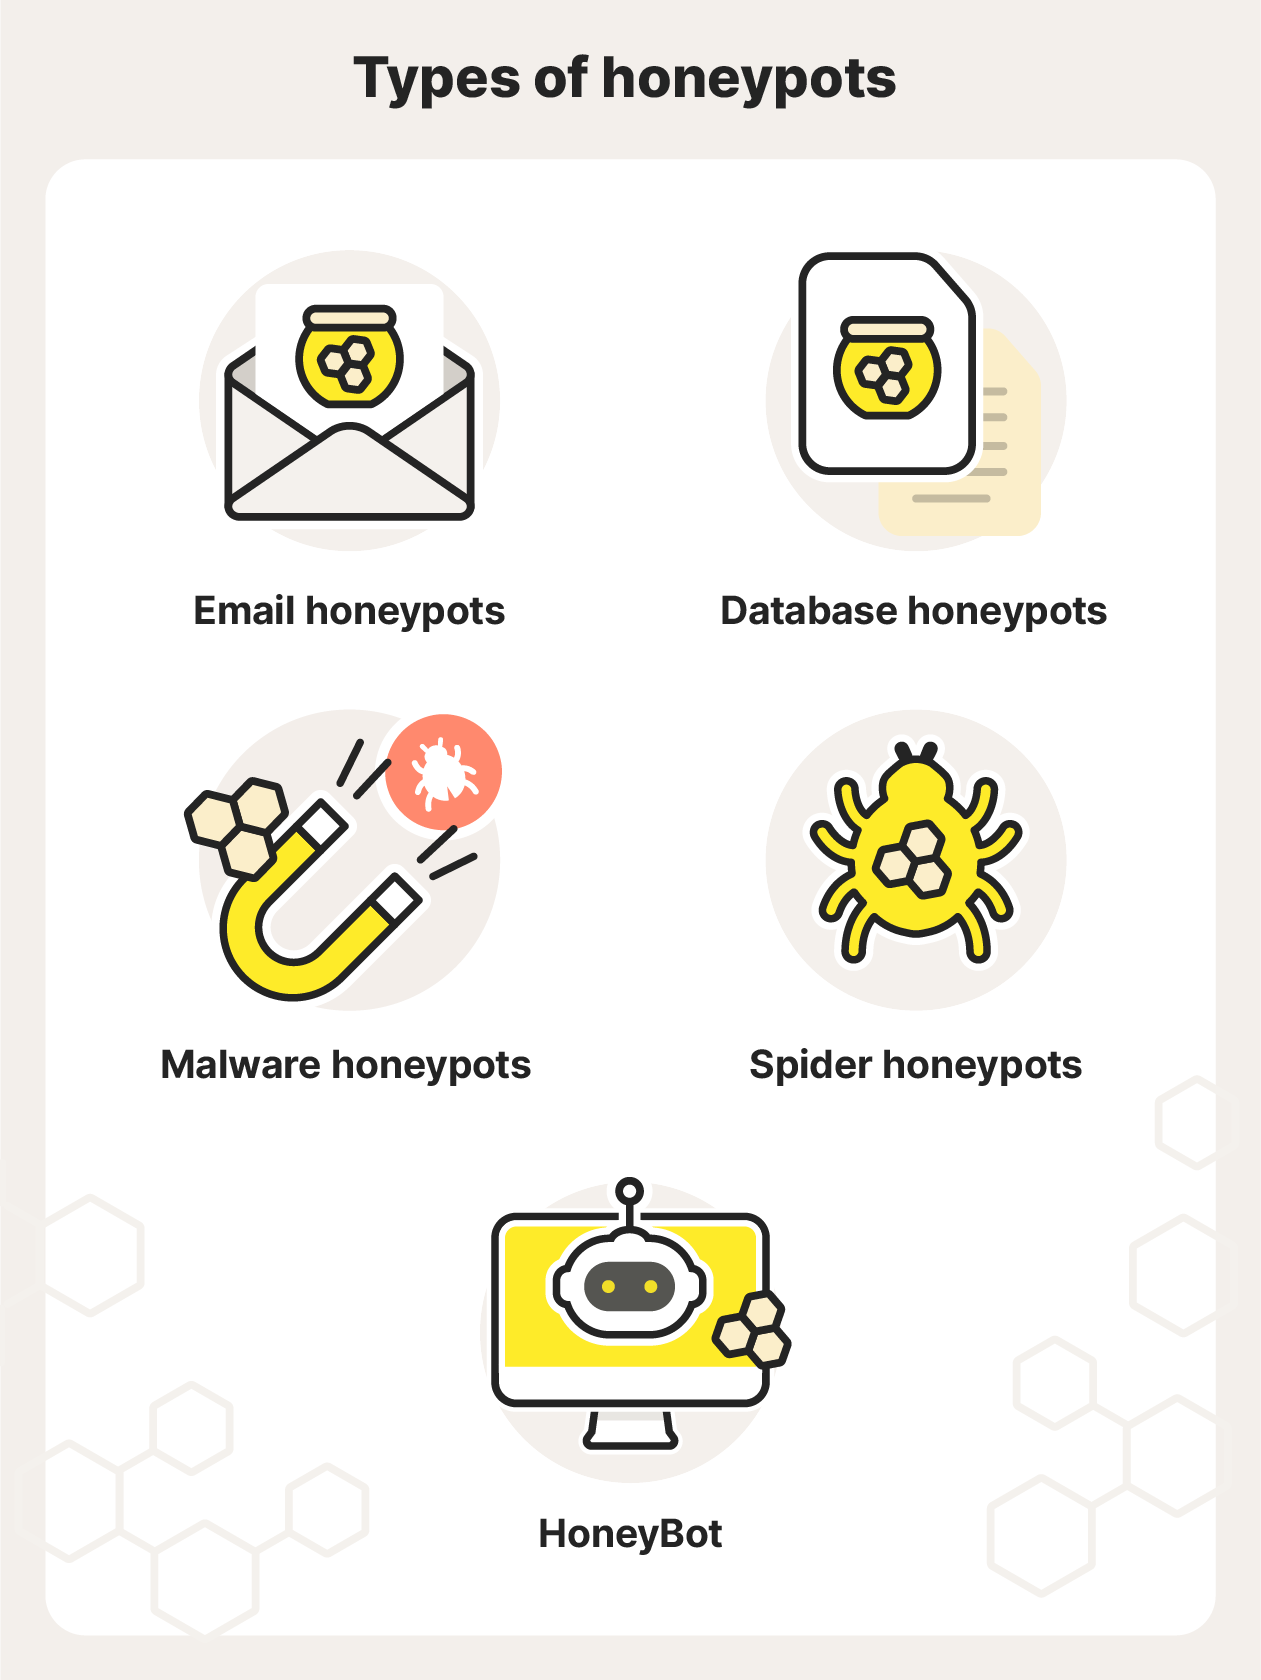 There are five primary types of honeypot traps